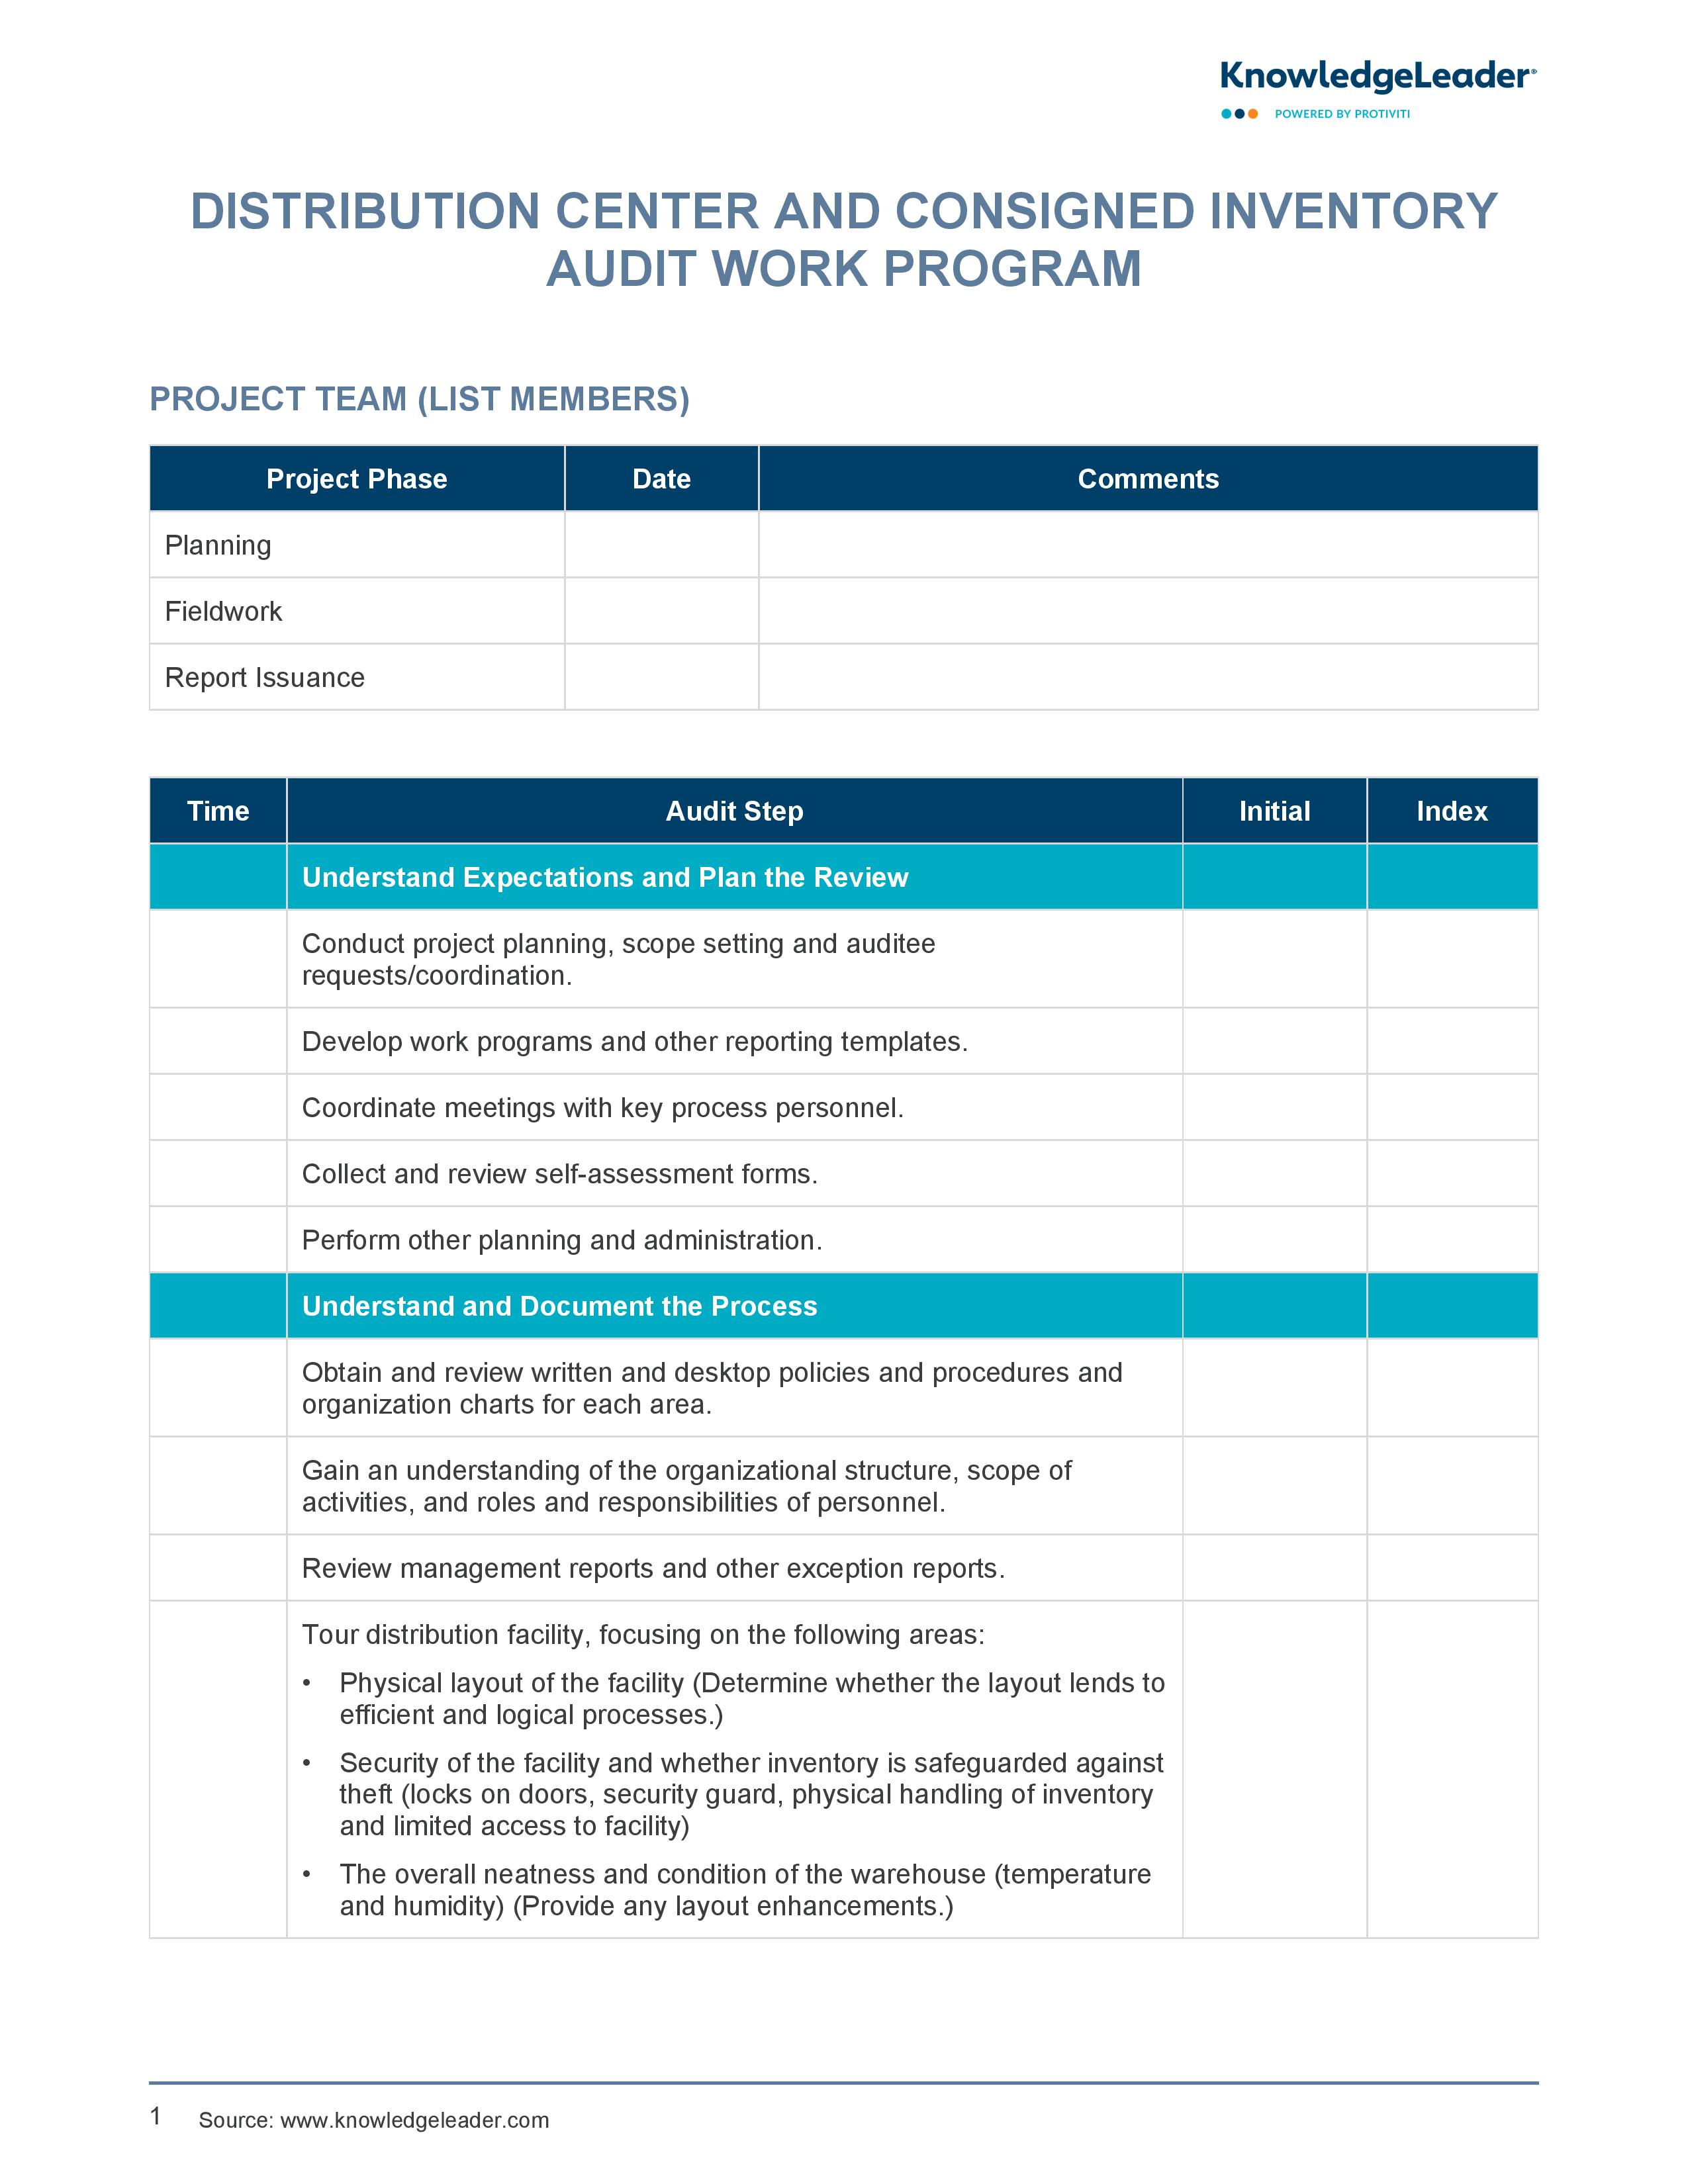 screenshot of the first page of Distribution Center Consigned Inventory Audit Work Program